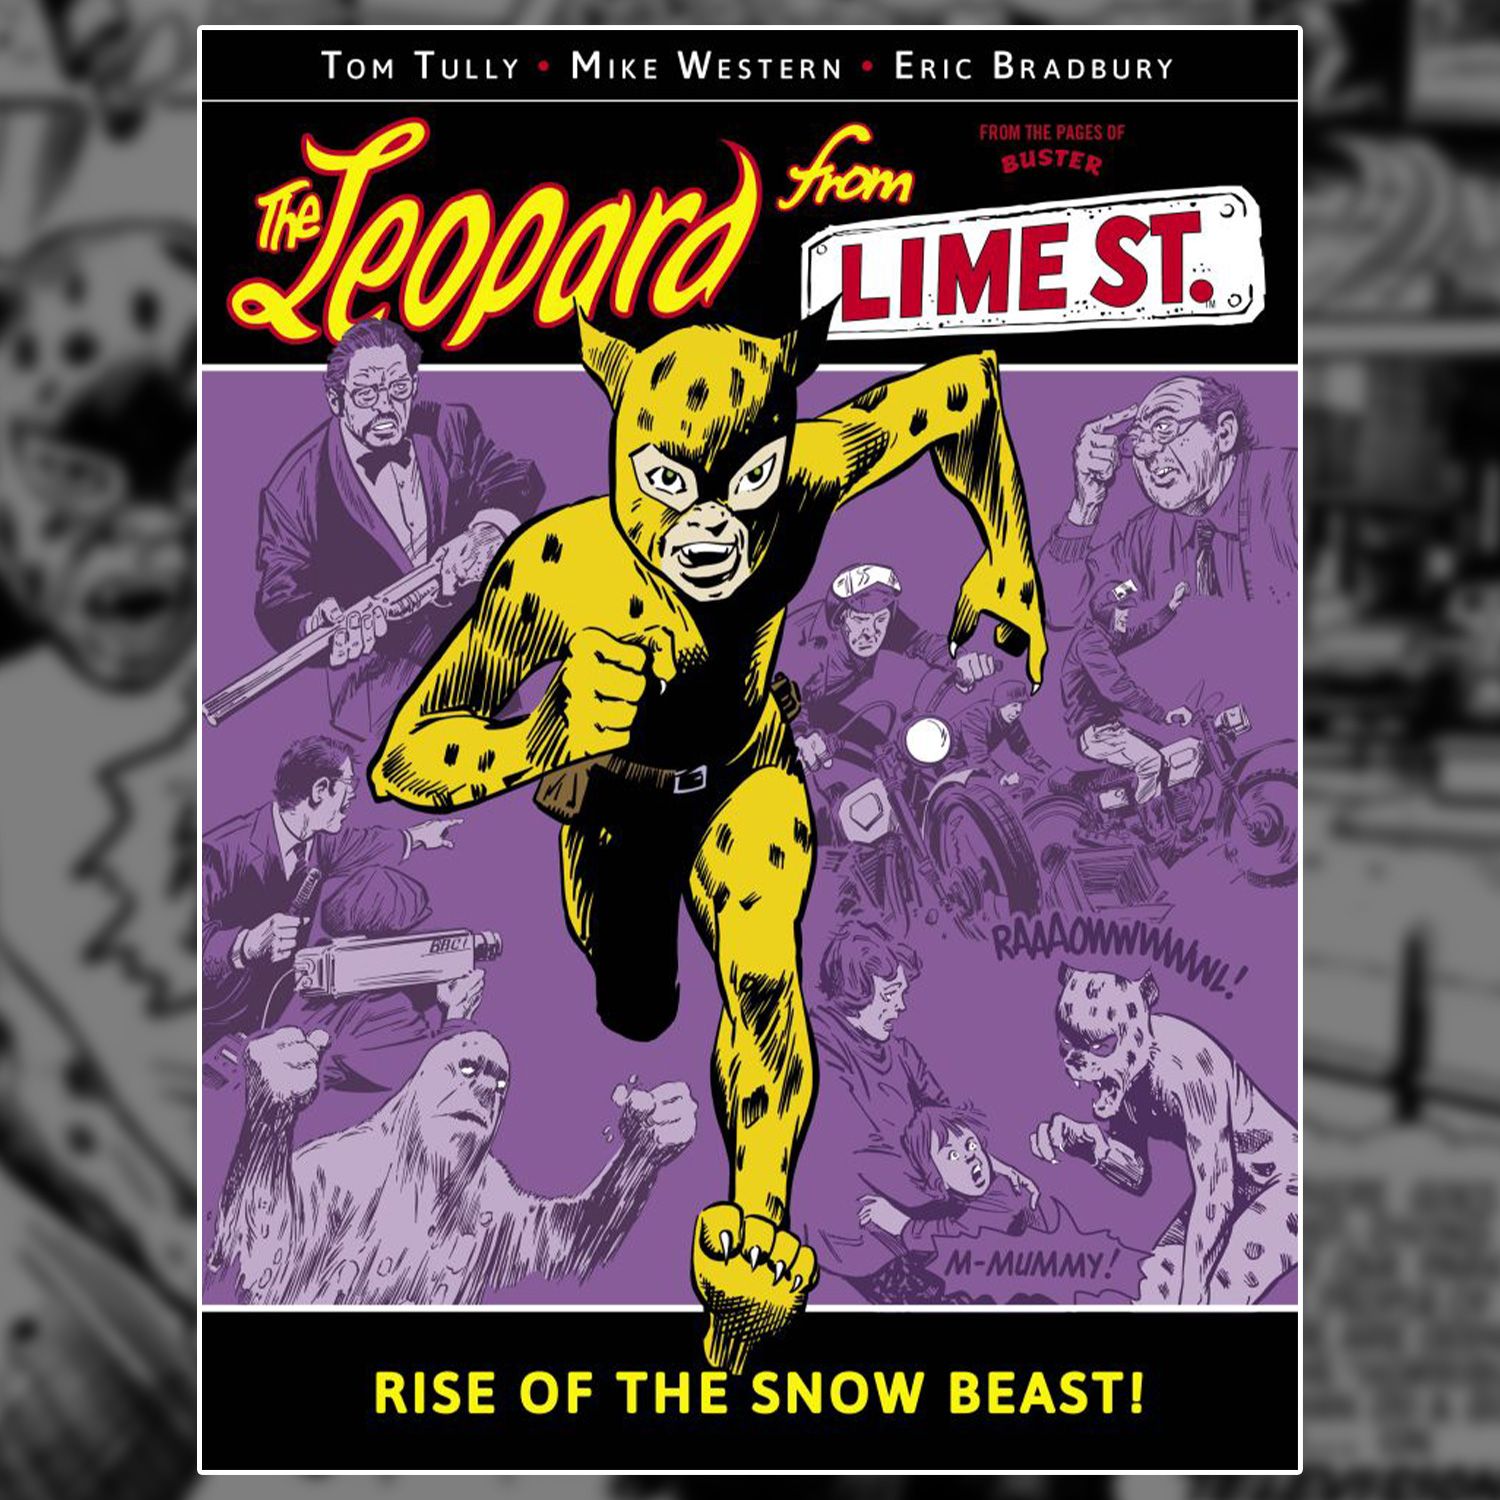 The Leopard from Lime Street Vol.3 – out now!